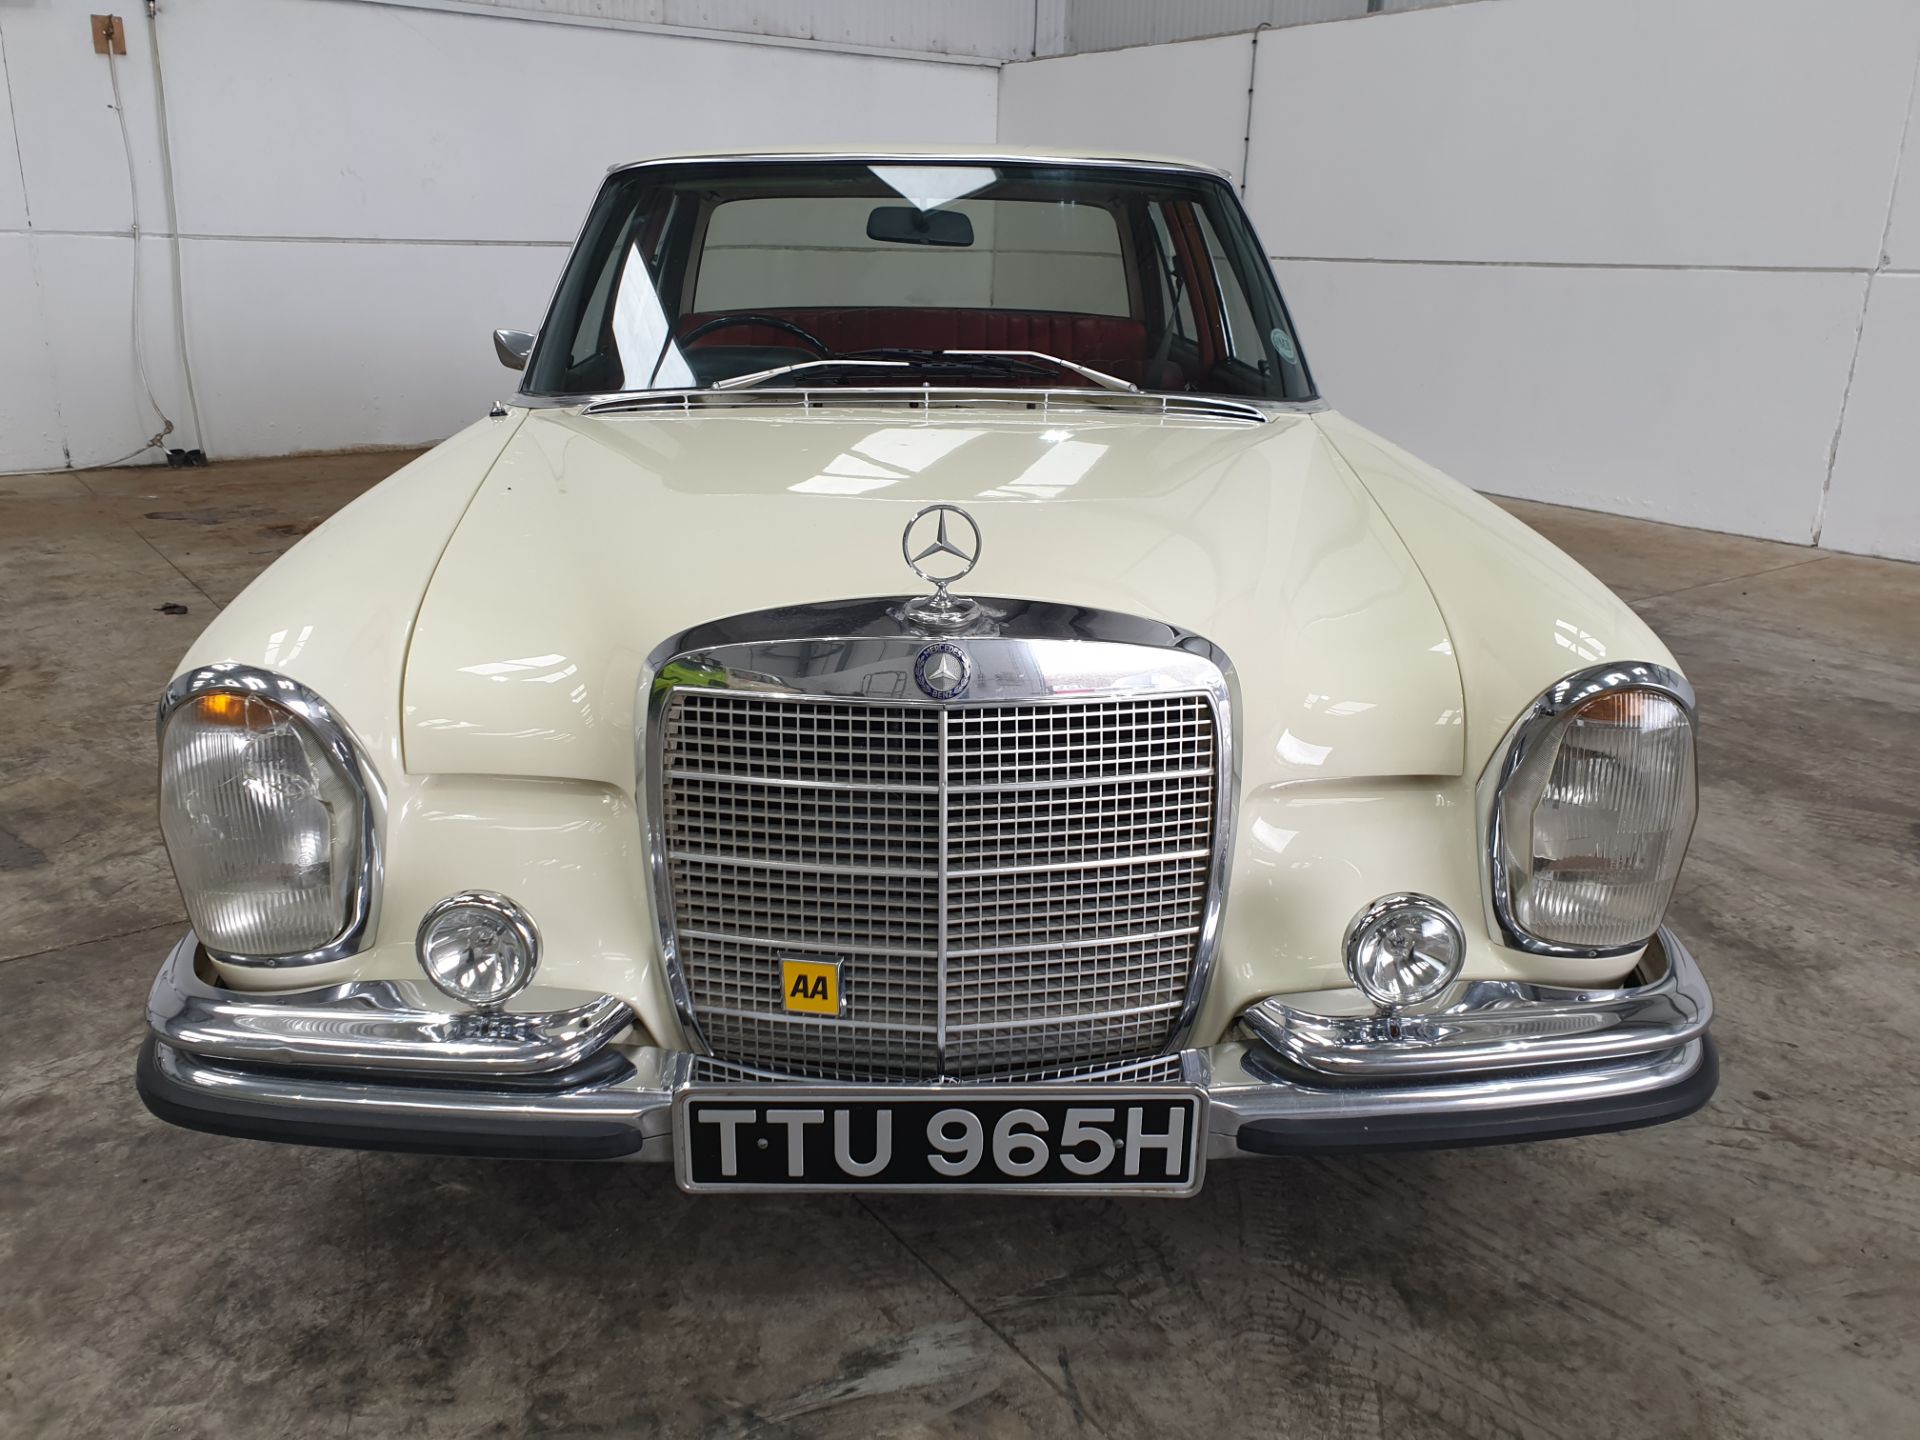 1970 Mercedes 280S - Image 9 of 17